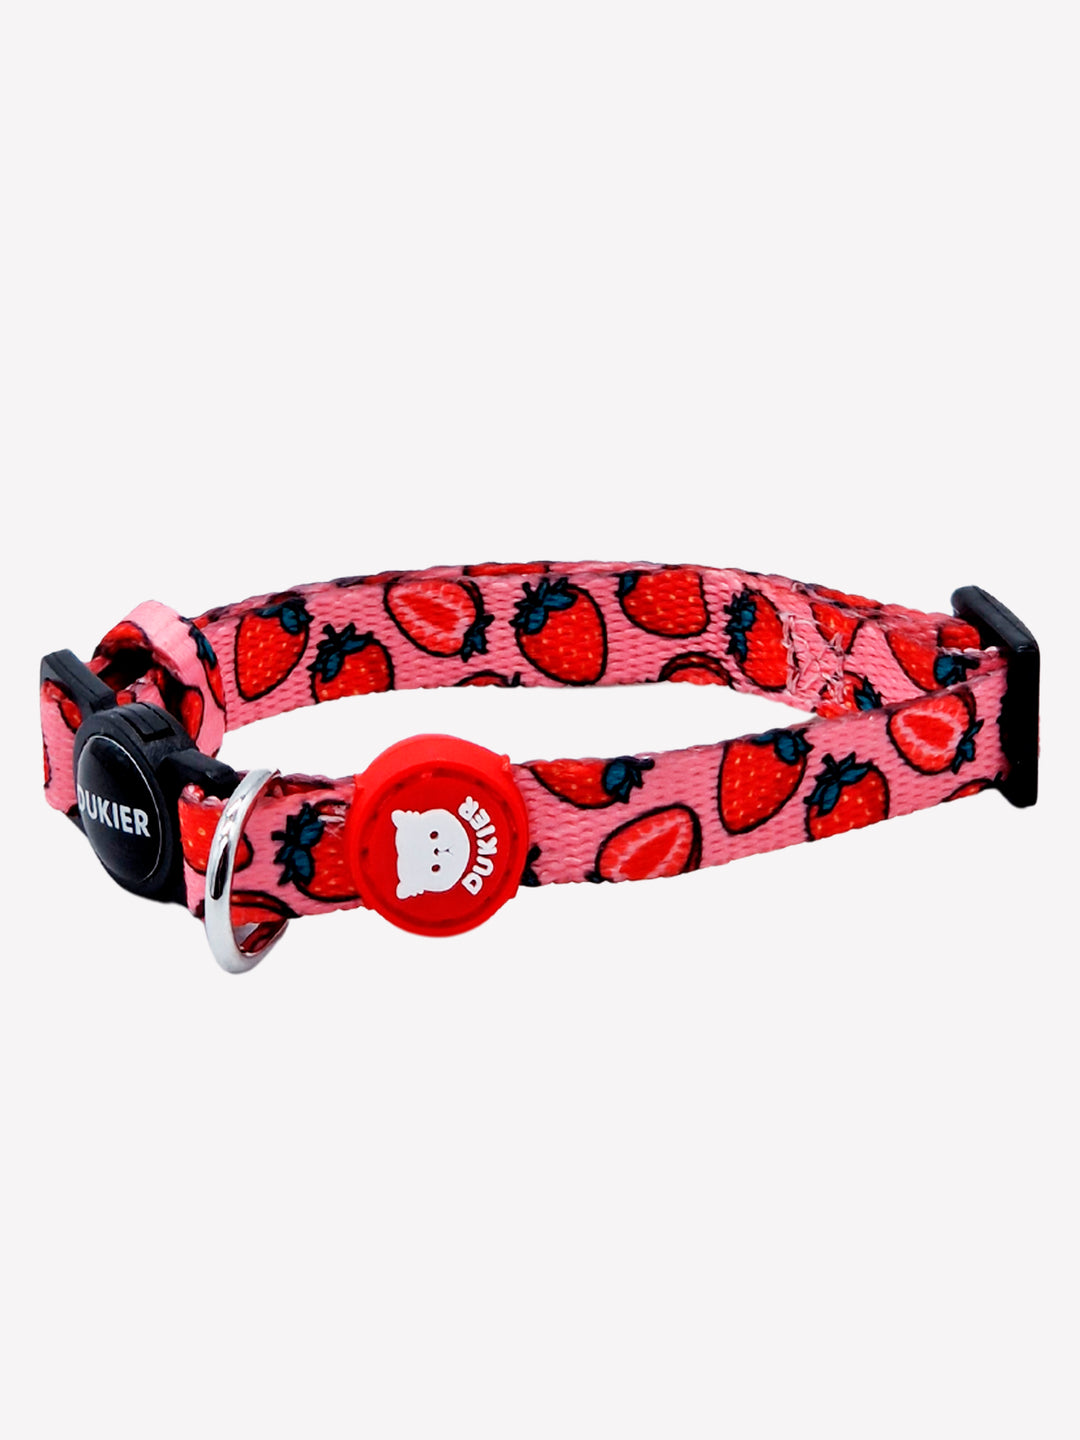 BERRY LOVE COLLAR FOR CAT